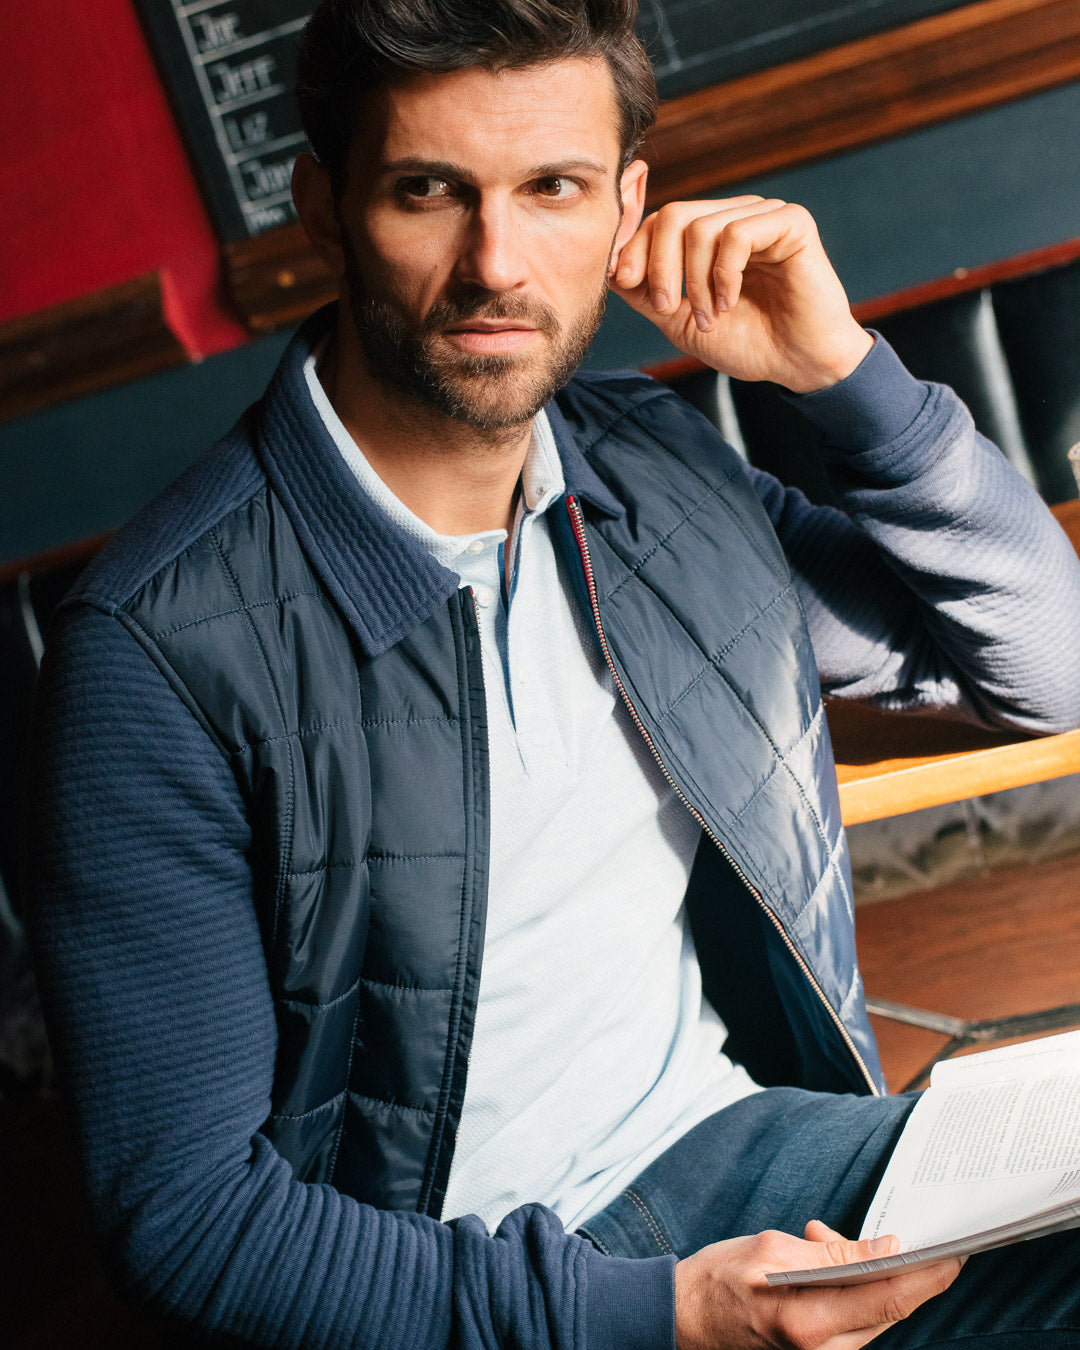  Image of a man in a casual pose, wearing a blue sweatshirt and a light blue polo shirt. He appears relaxed and comfortable, with a slight smile on his face, and is holding a notebook. Get inspired by Guide London's premium clothing collection for men's fashion.